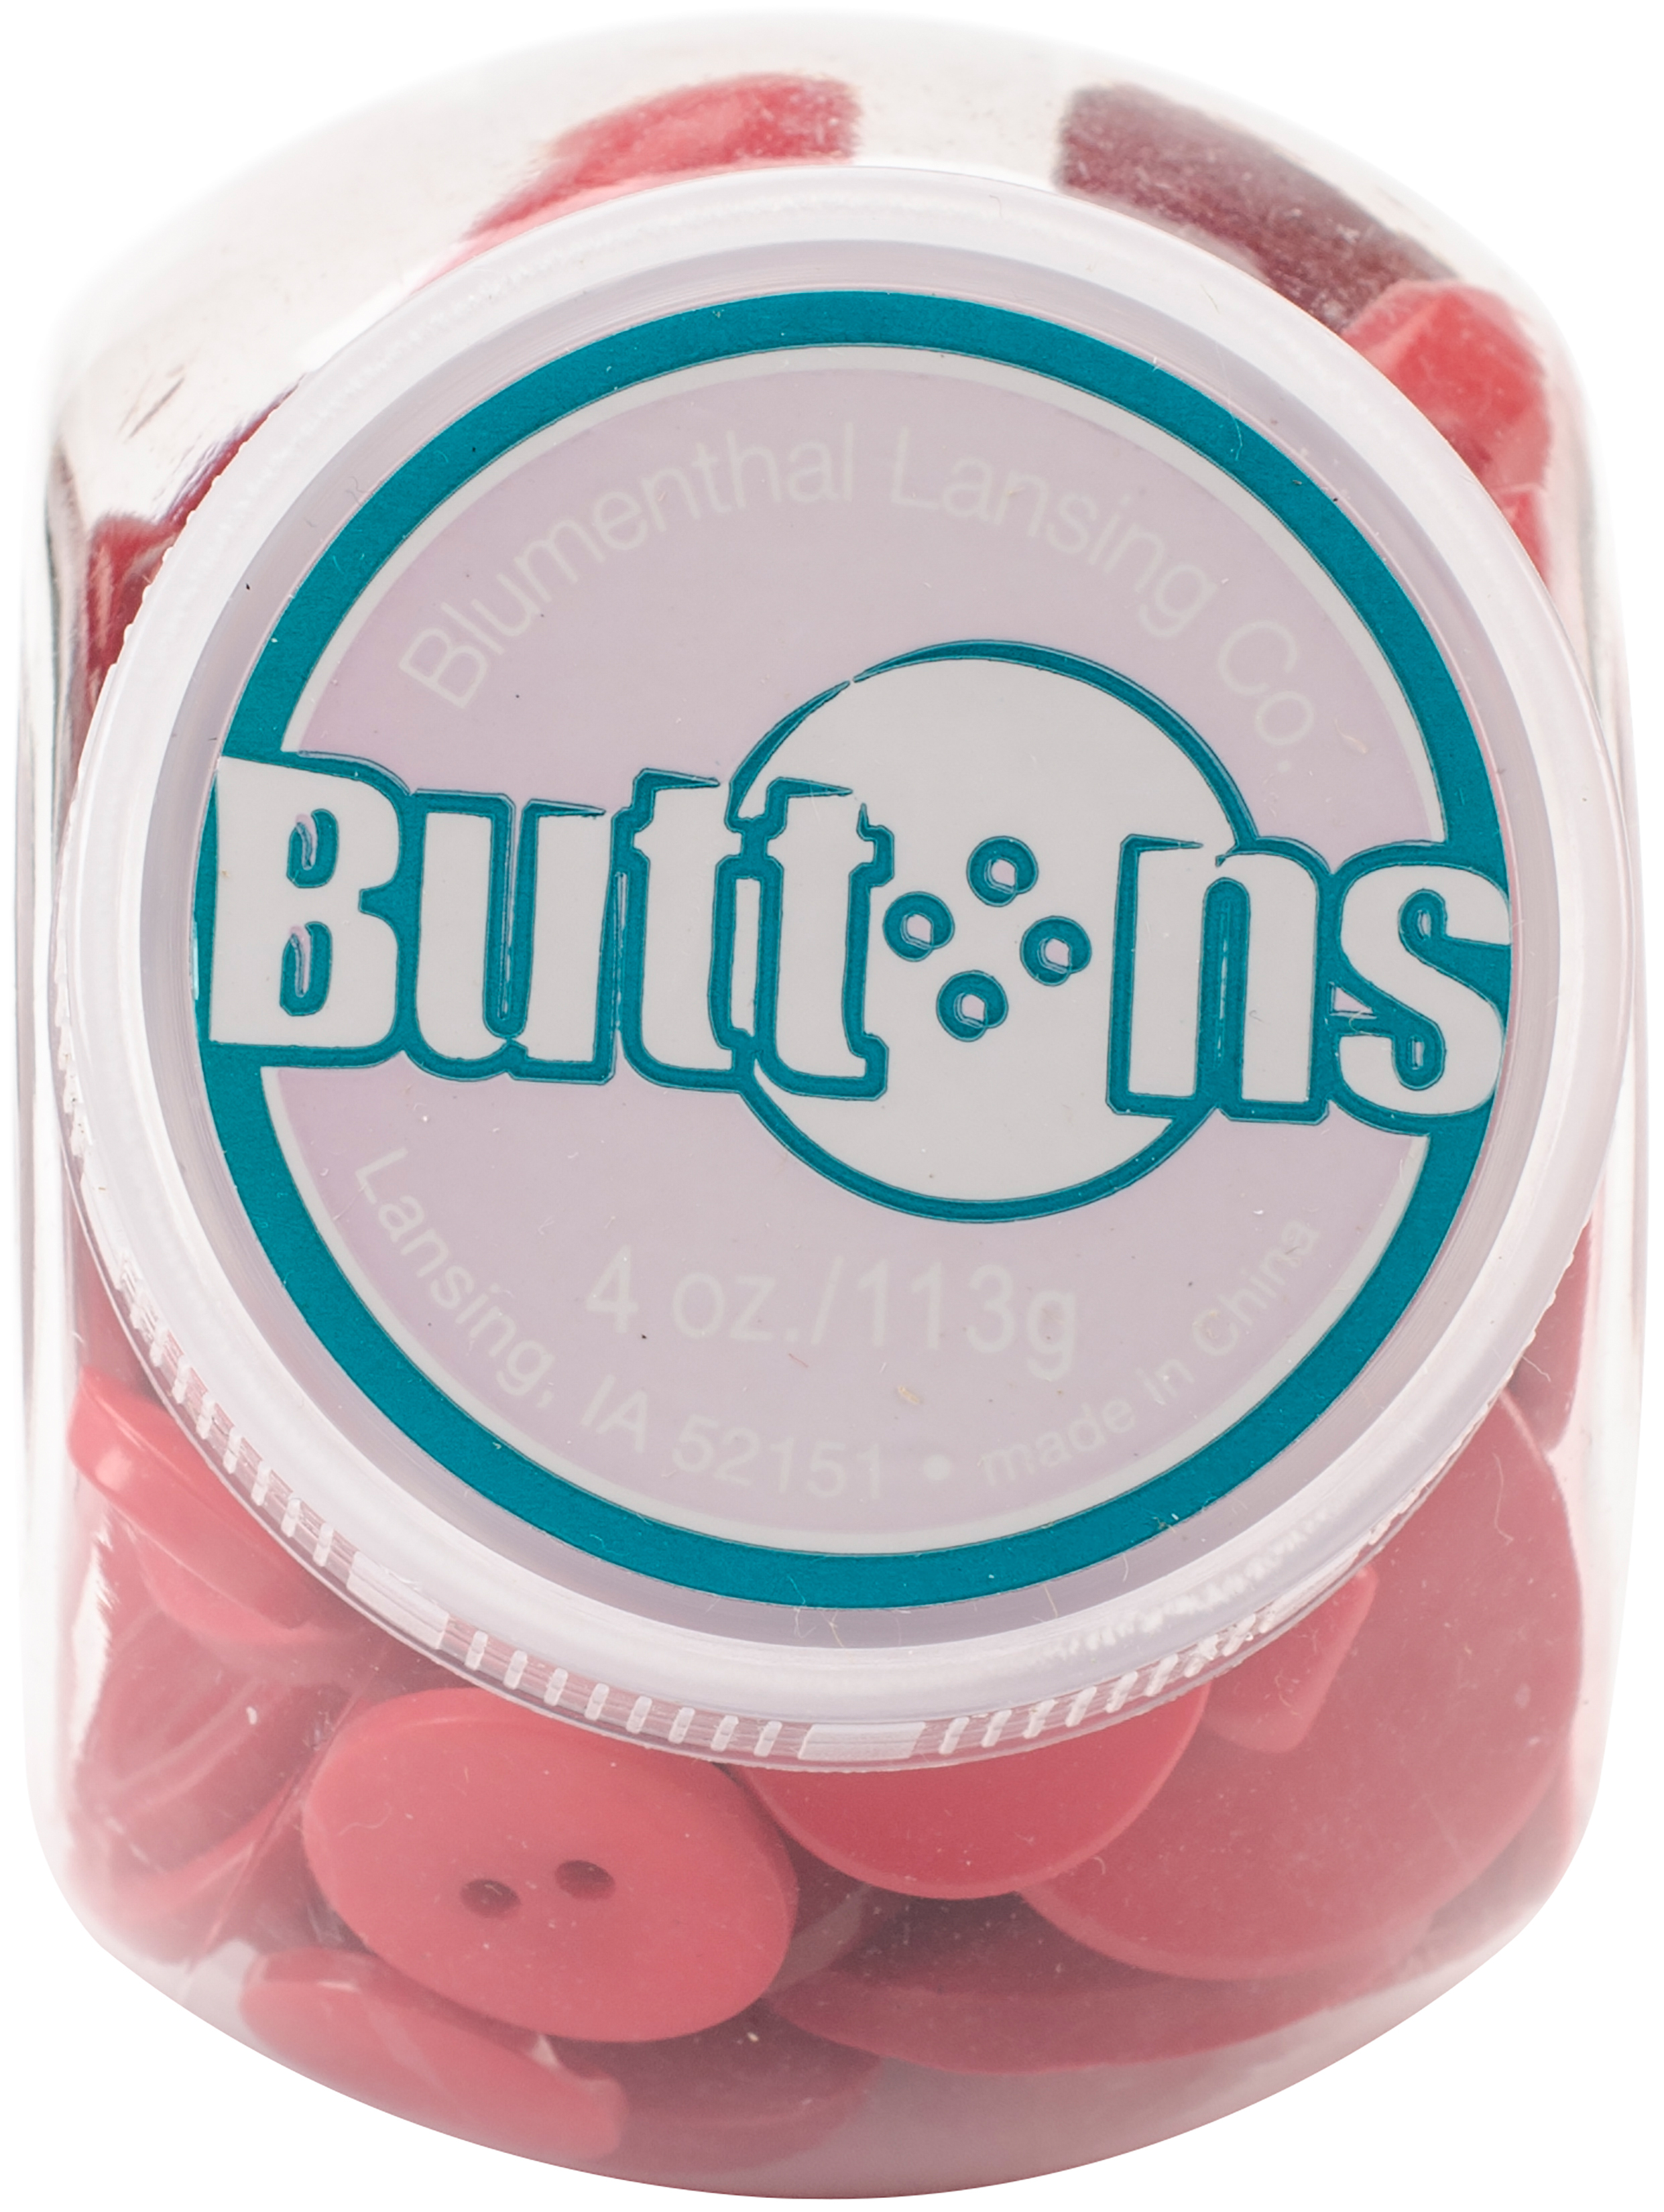 Le Bouton Red Button Jar, 4 Oz. - image 1 of 2